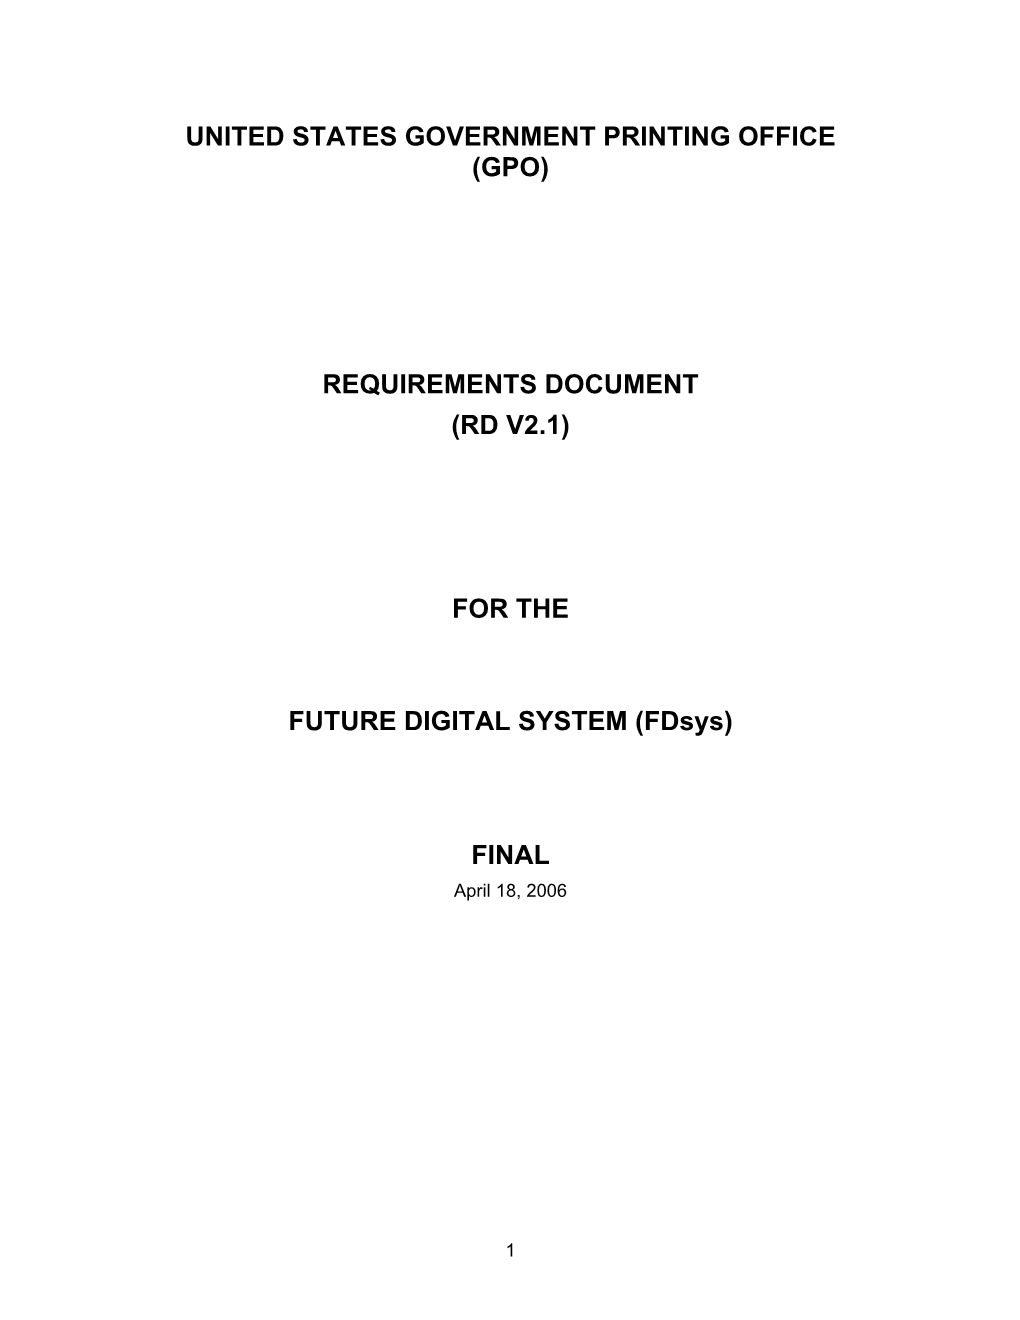 Requirements Document (Rd V2.1)